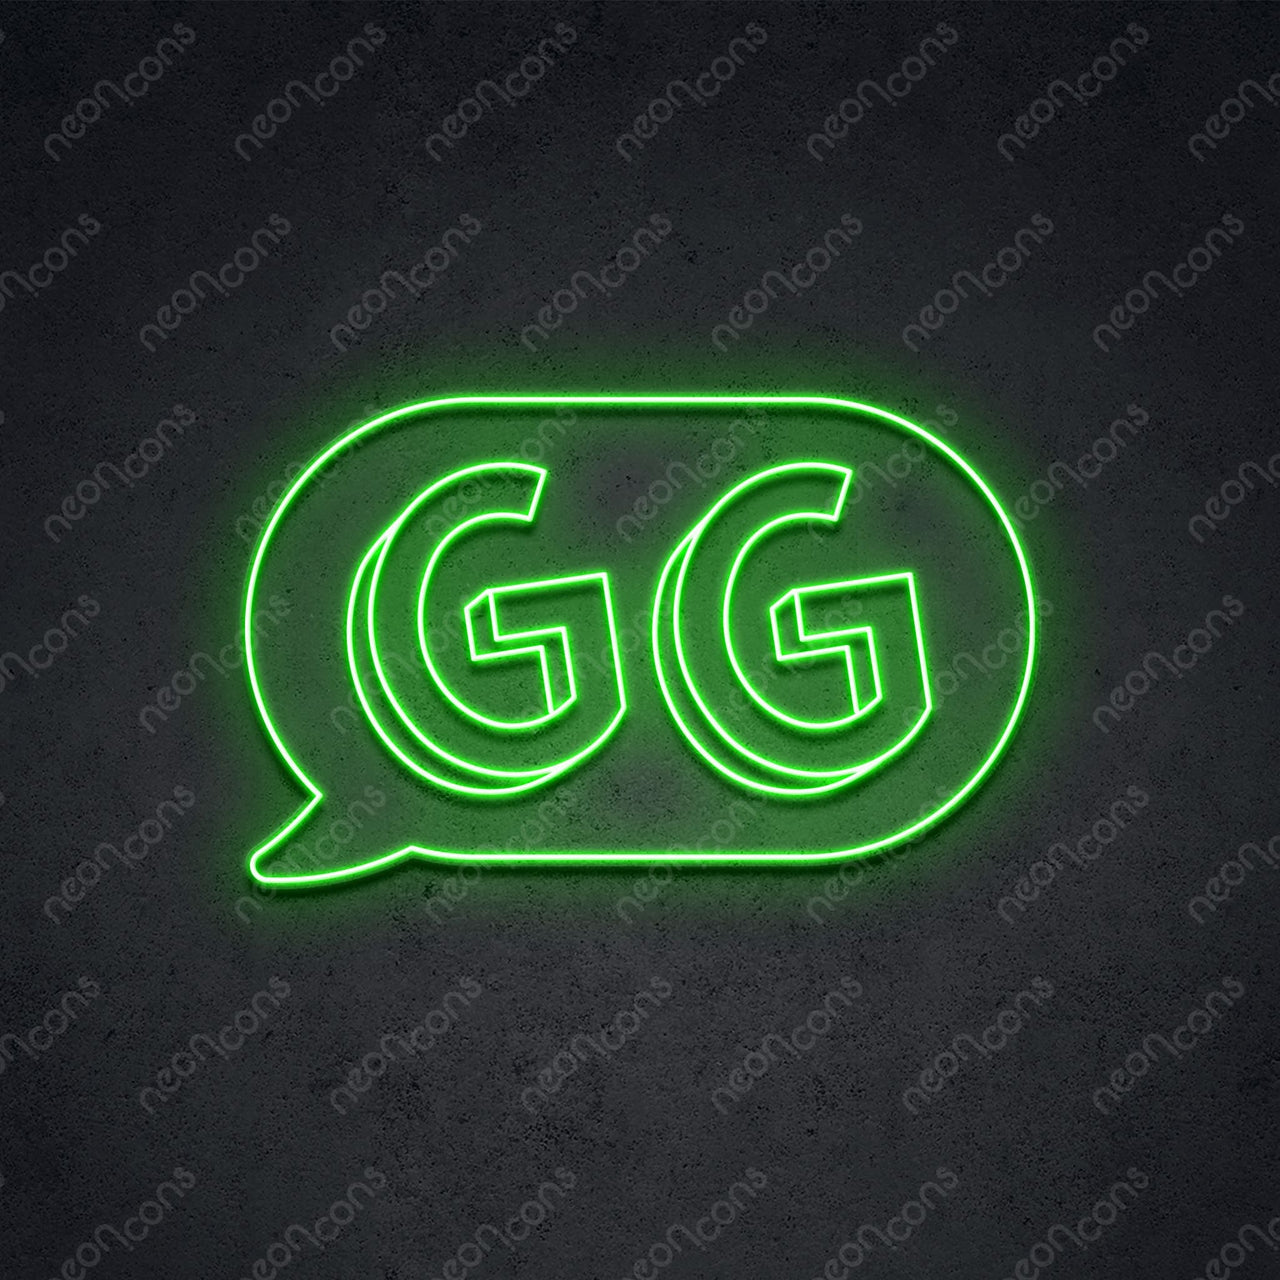 'GG In The Chat' Neon Sign 45cm (1.5ft) / Green / LED by Neon Icons